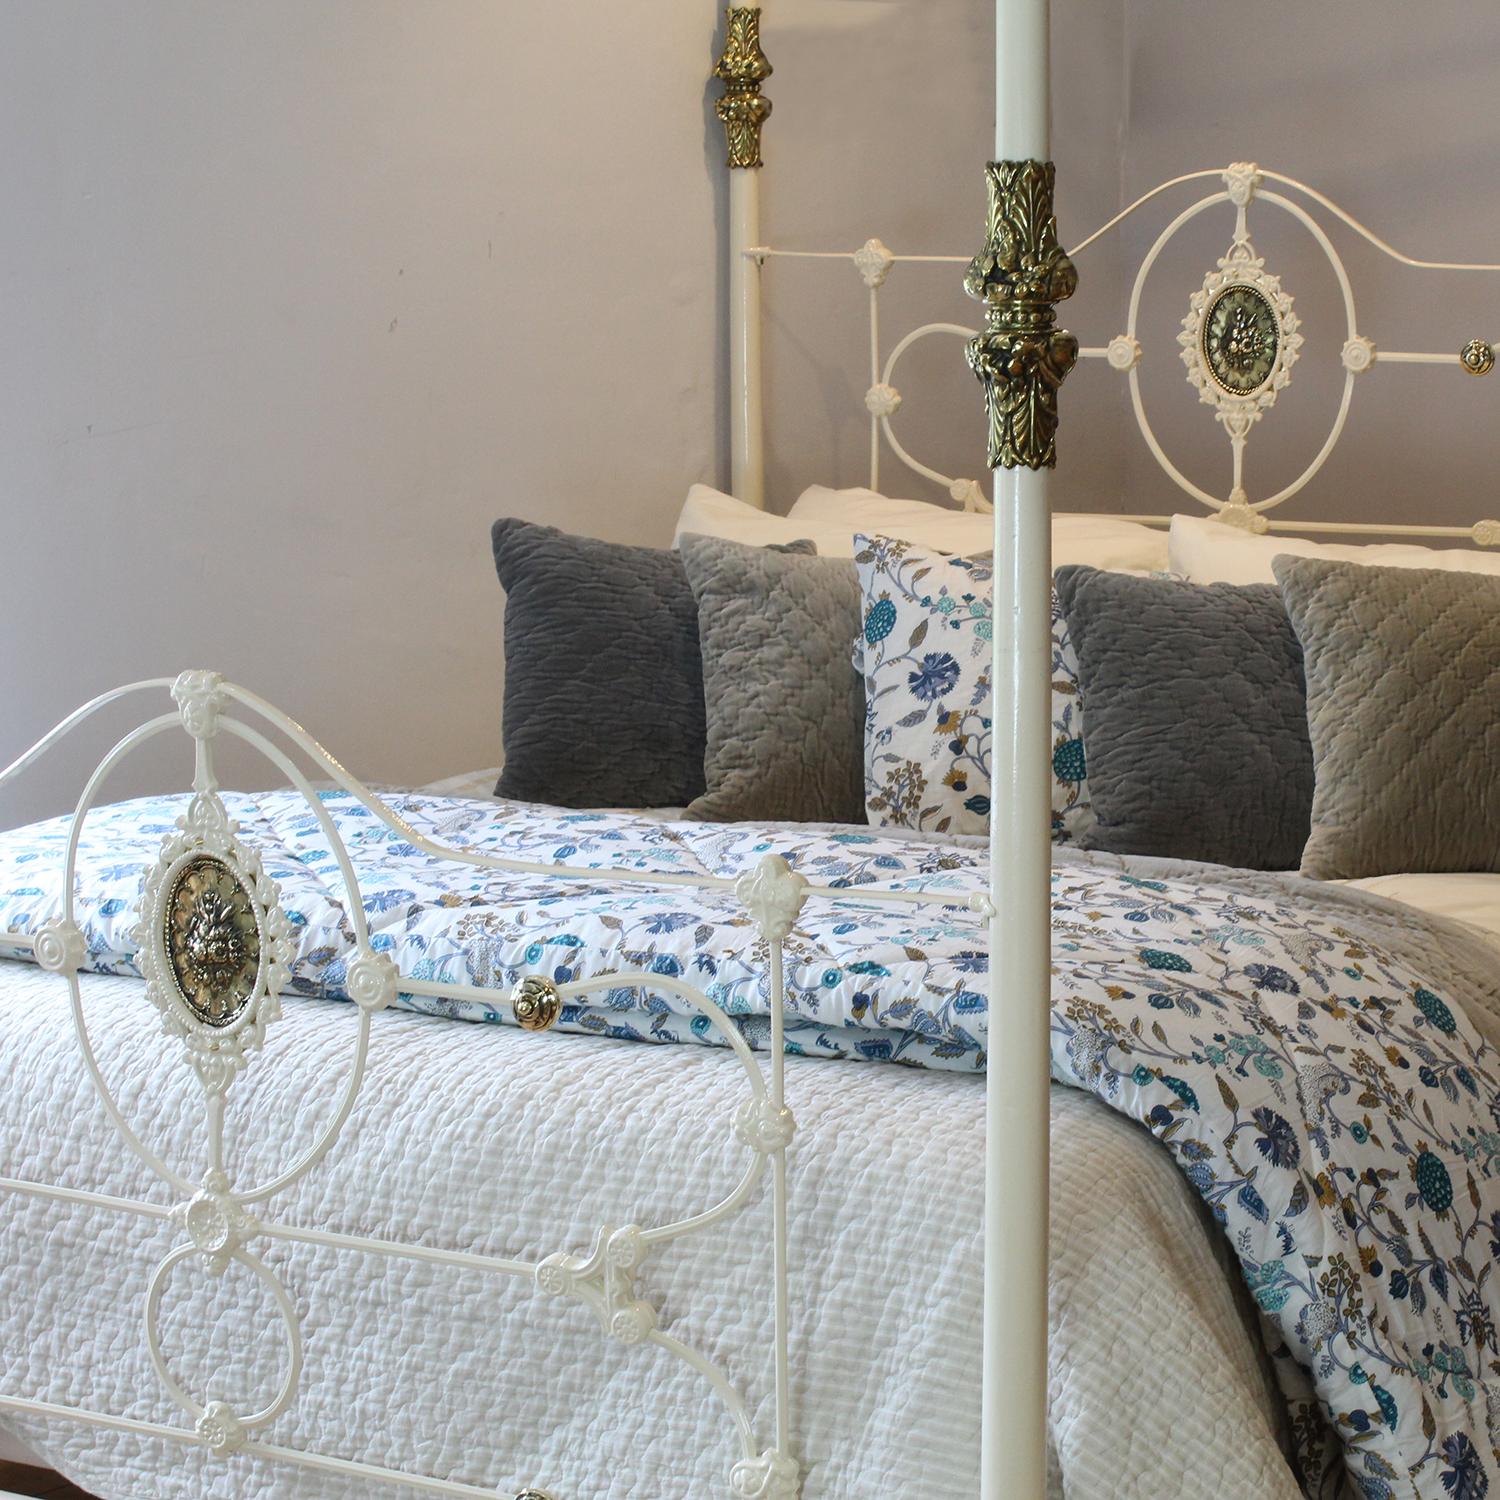 A 5ft wide cast iron antique four poster bed in cream with ornate castings and original brass decoration. 

The bed was originally manufactured in Birmingham, United Kingdom, towards the end of the Nineteeth Century and made for the export